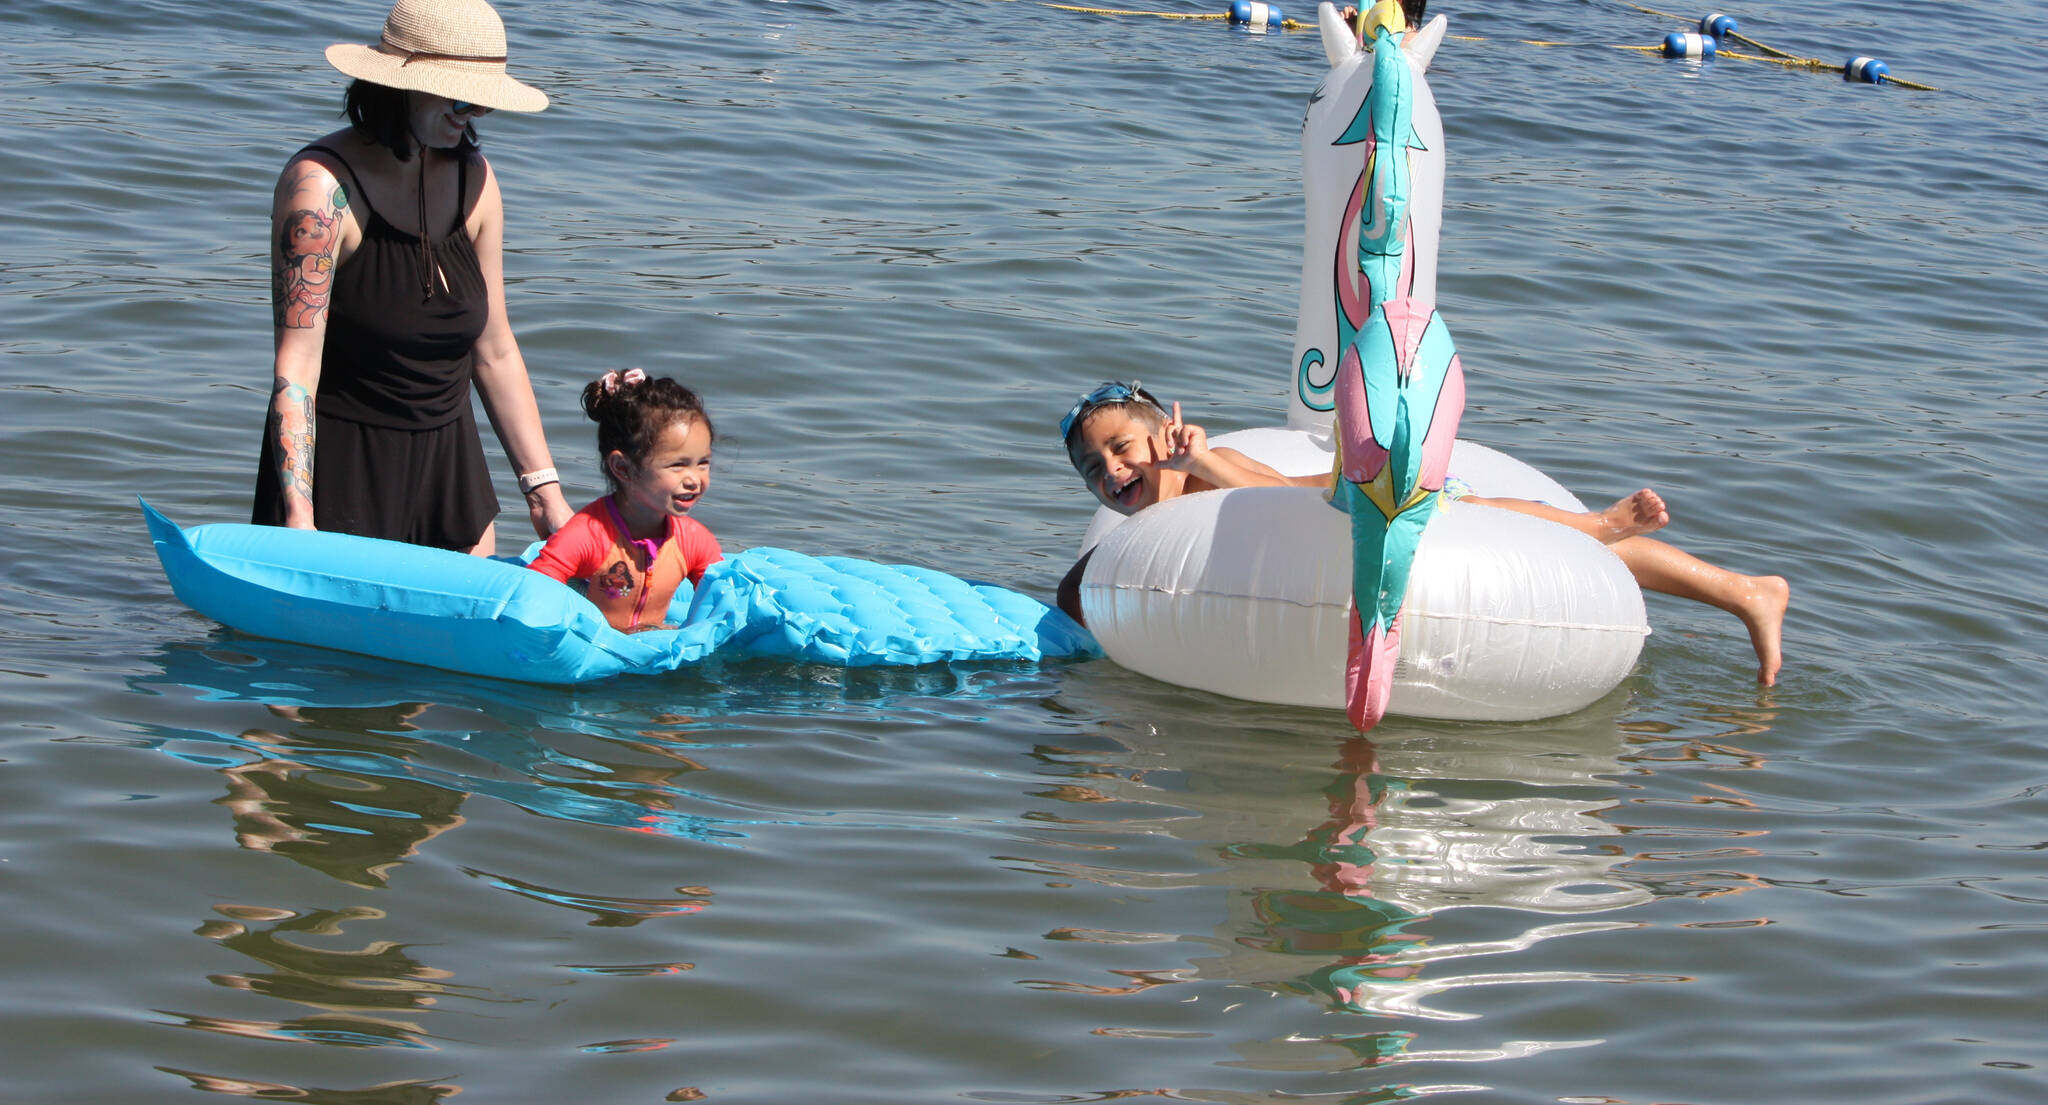 Naomi Nabura plays with her children Sonia, 3, and Theo, 6, in Lake Washington off Luther Burbank Park during the scorching 90-degree temperatures on July 26. Naomi is a former Island resident. Andy Nystrom/ staff photo